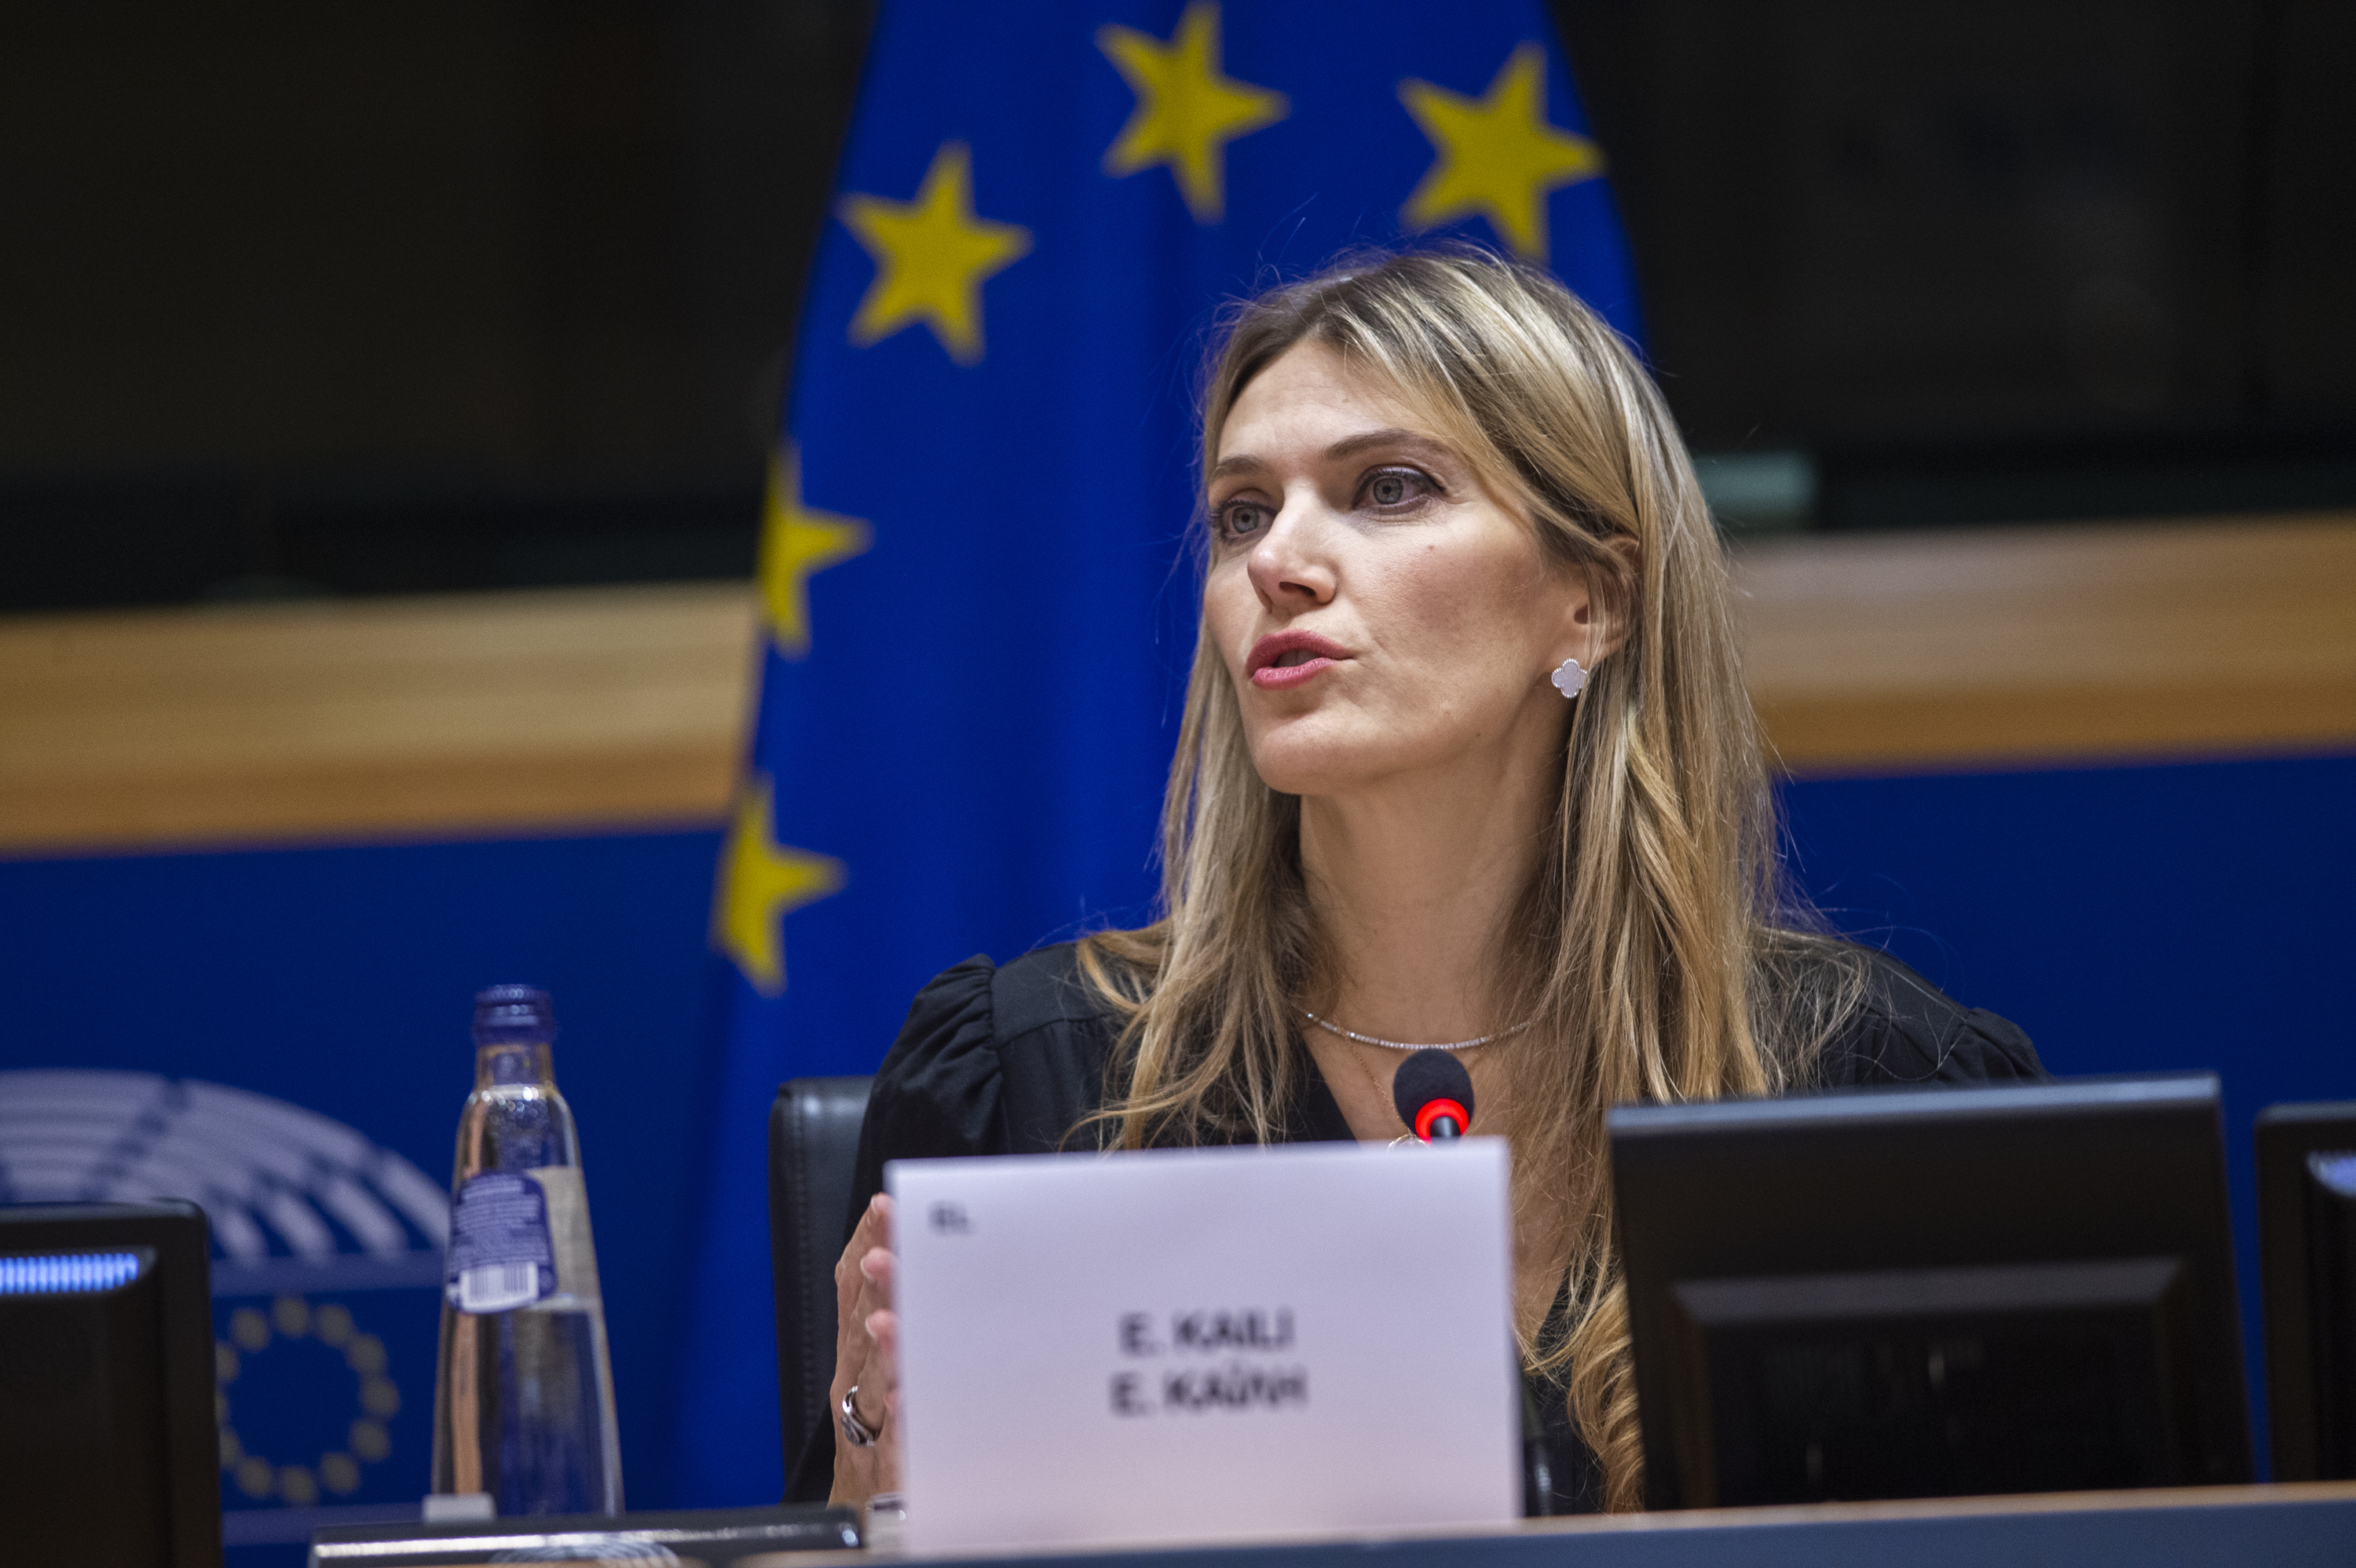 Panzeri, who was arrested last week along with the former vice-president of the European Parliament, Eva Kylie, his emotional partner and an unidentified fourth person, maintained ties to Morocco during his time as an MEP between 2004 and 2019.  (AP)